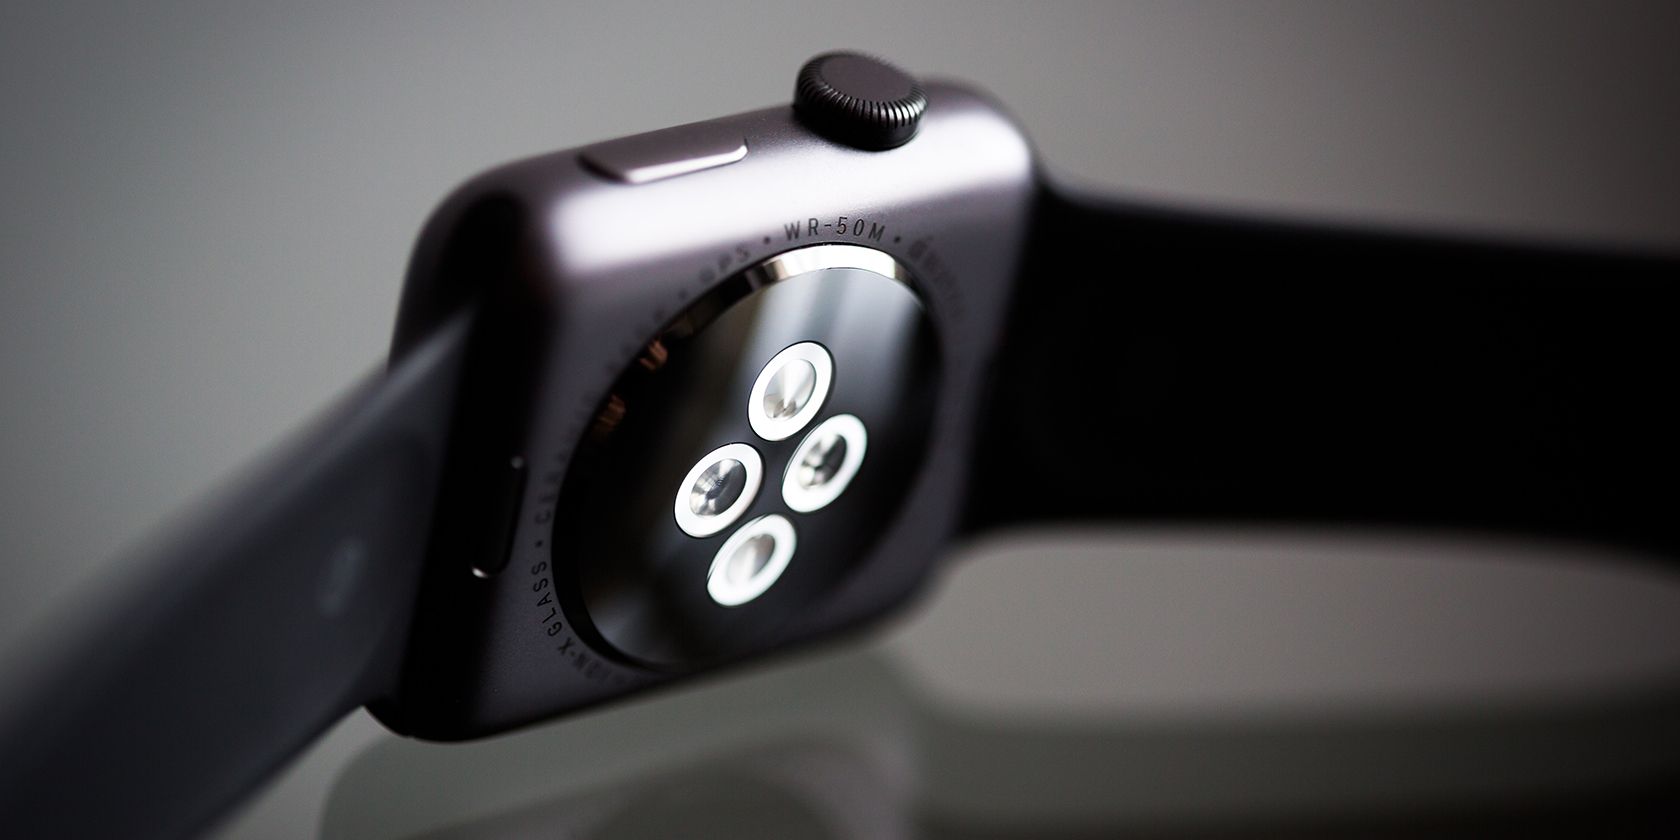 The sensors on the back of an Apple watch